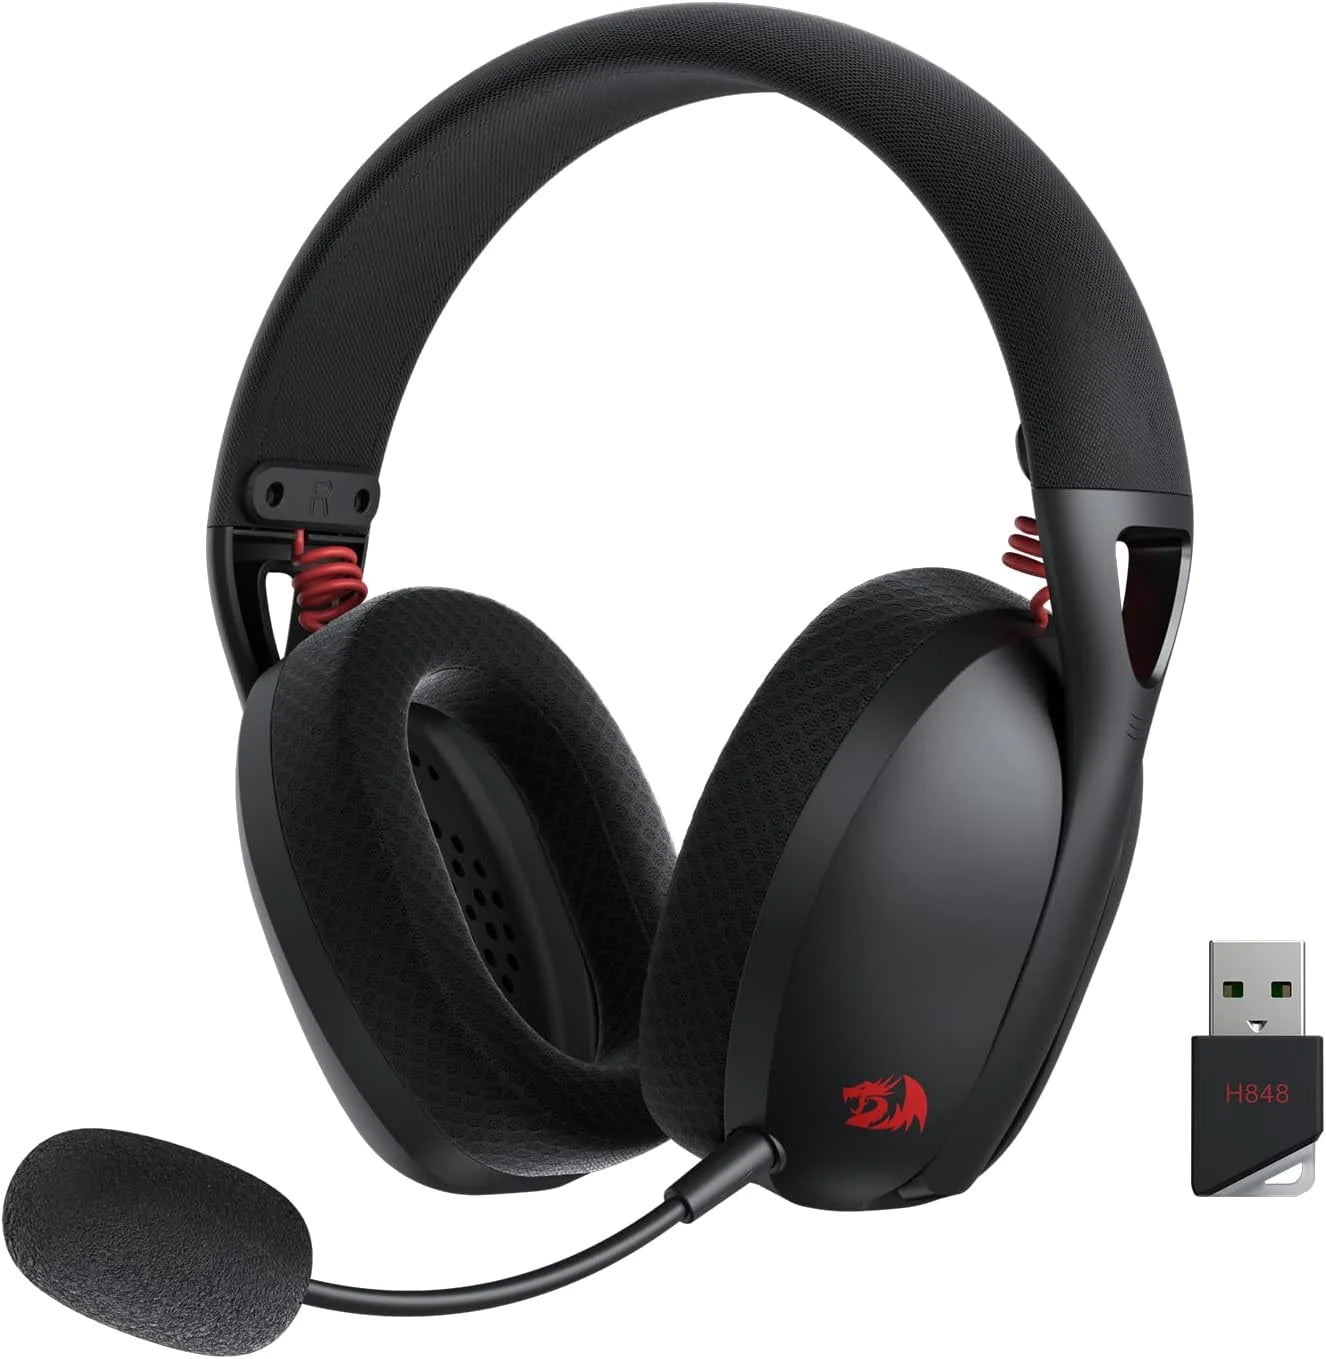 Redragon H848 IRE Bluetooth Wireless Gaming Headset - Lightweight - 7.1 Surround Sound - 40MM Drivers - Detachable Microphone - Multi Platforms for PC, PS5/4/3, Switch, Mobile